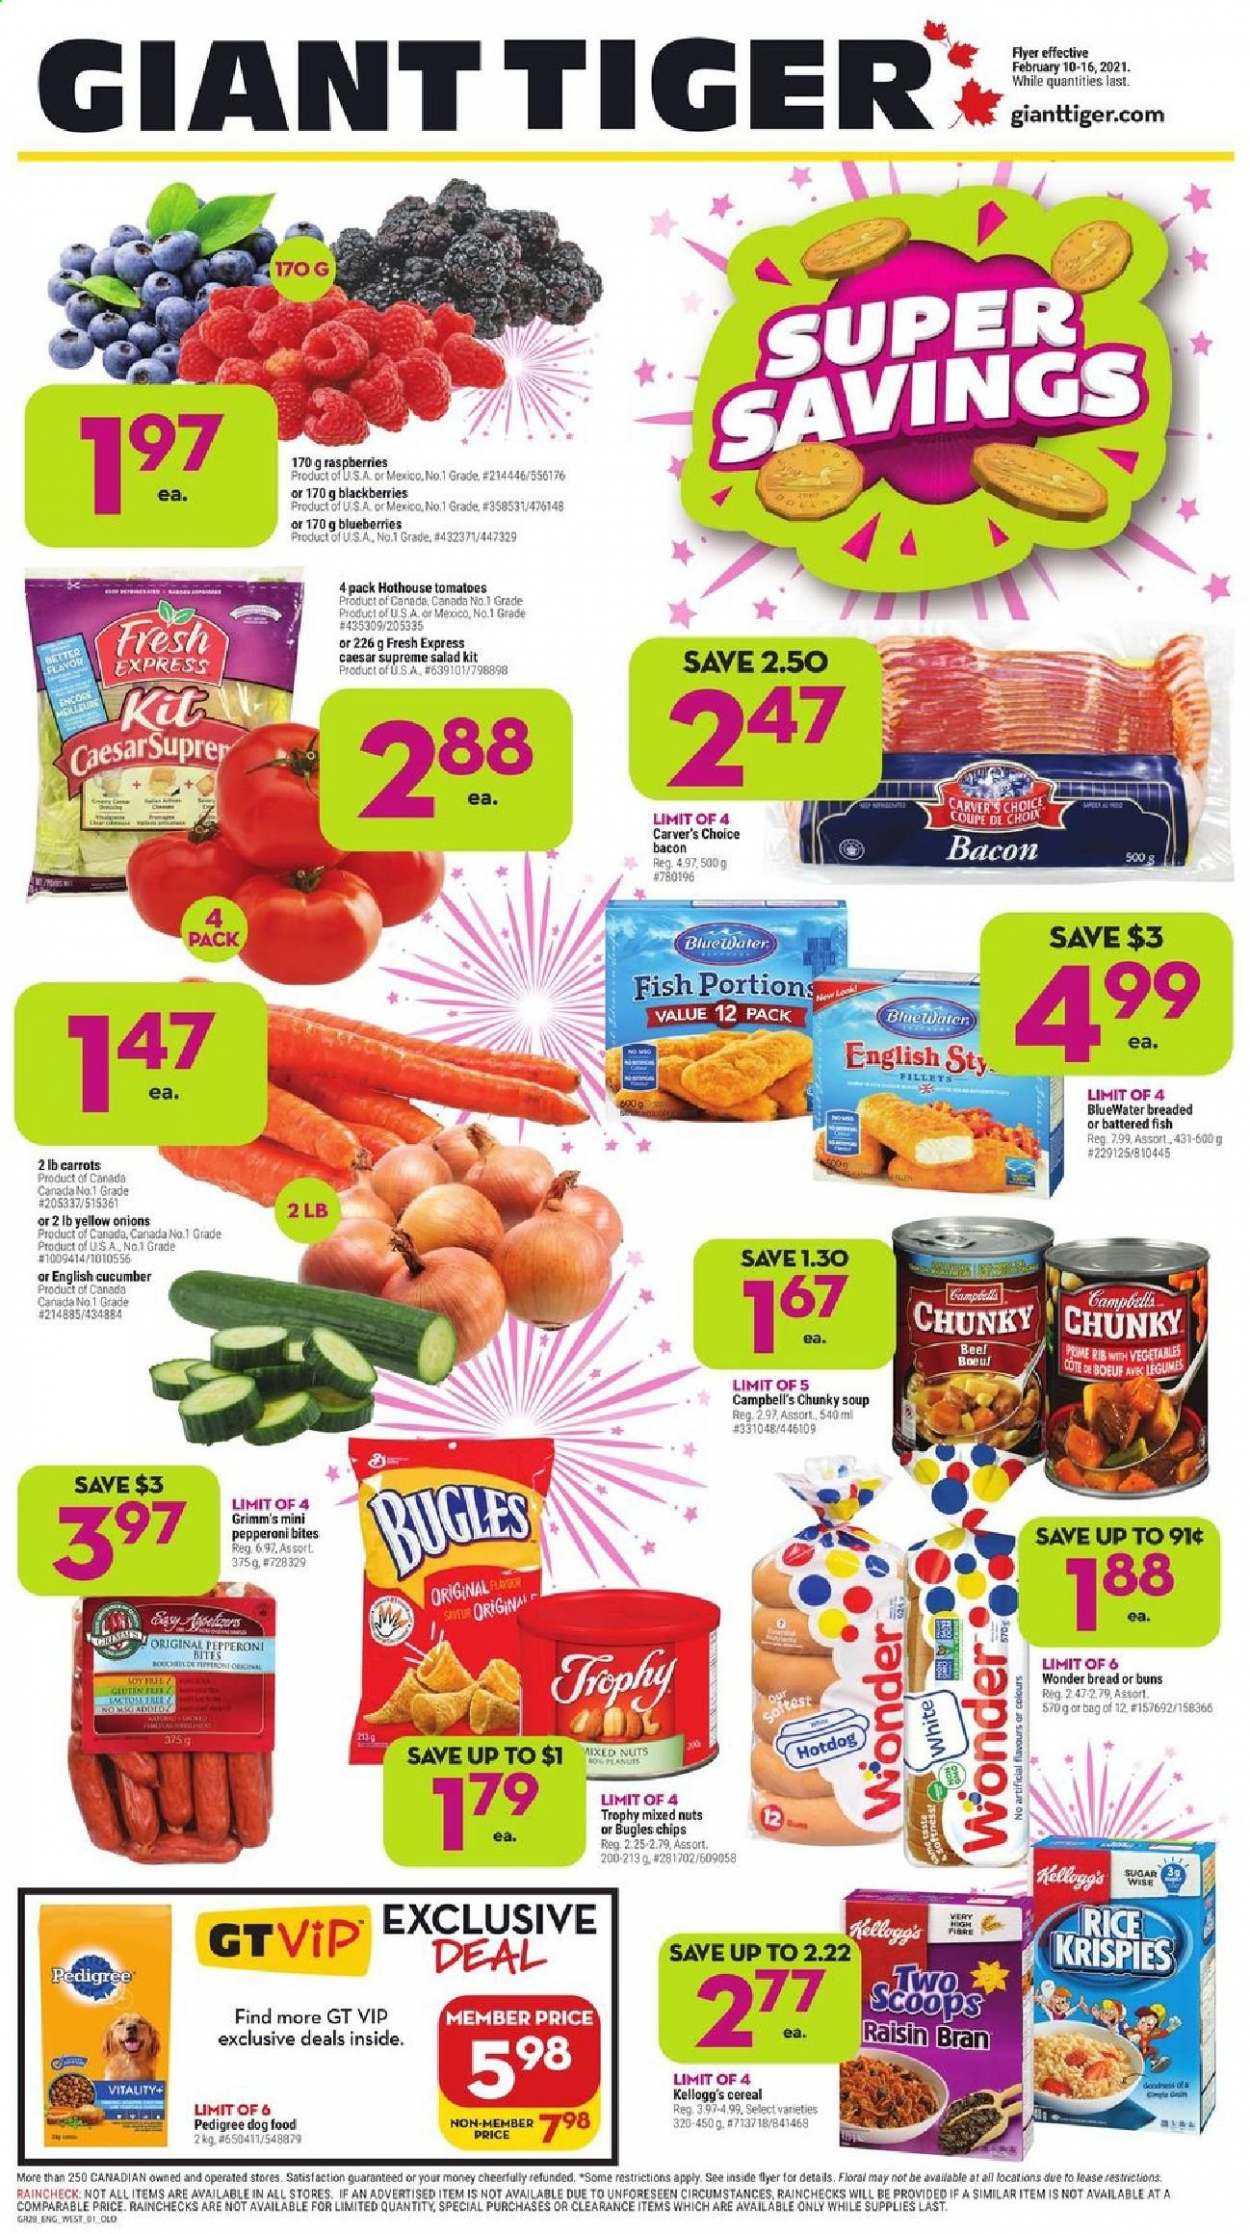 thumbnail - Giant Tiger Flyer - February 10, 2021 - February 16, 2021 - Sales products - bread, hot dog rolls, buns, carrots, tomatoes, salad, blackberries, blueberries, fish, Campbell's, hot dog, soup, bacon, pepperoni, Kellogg's, sugar, cereals, Rice Krispies, Raisin Bran, mixed nuts, animal food, dog food, Pedigree, trophy cup, chips. Page 1.